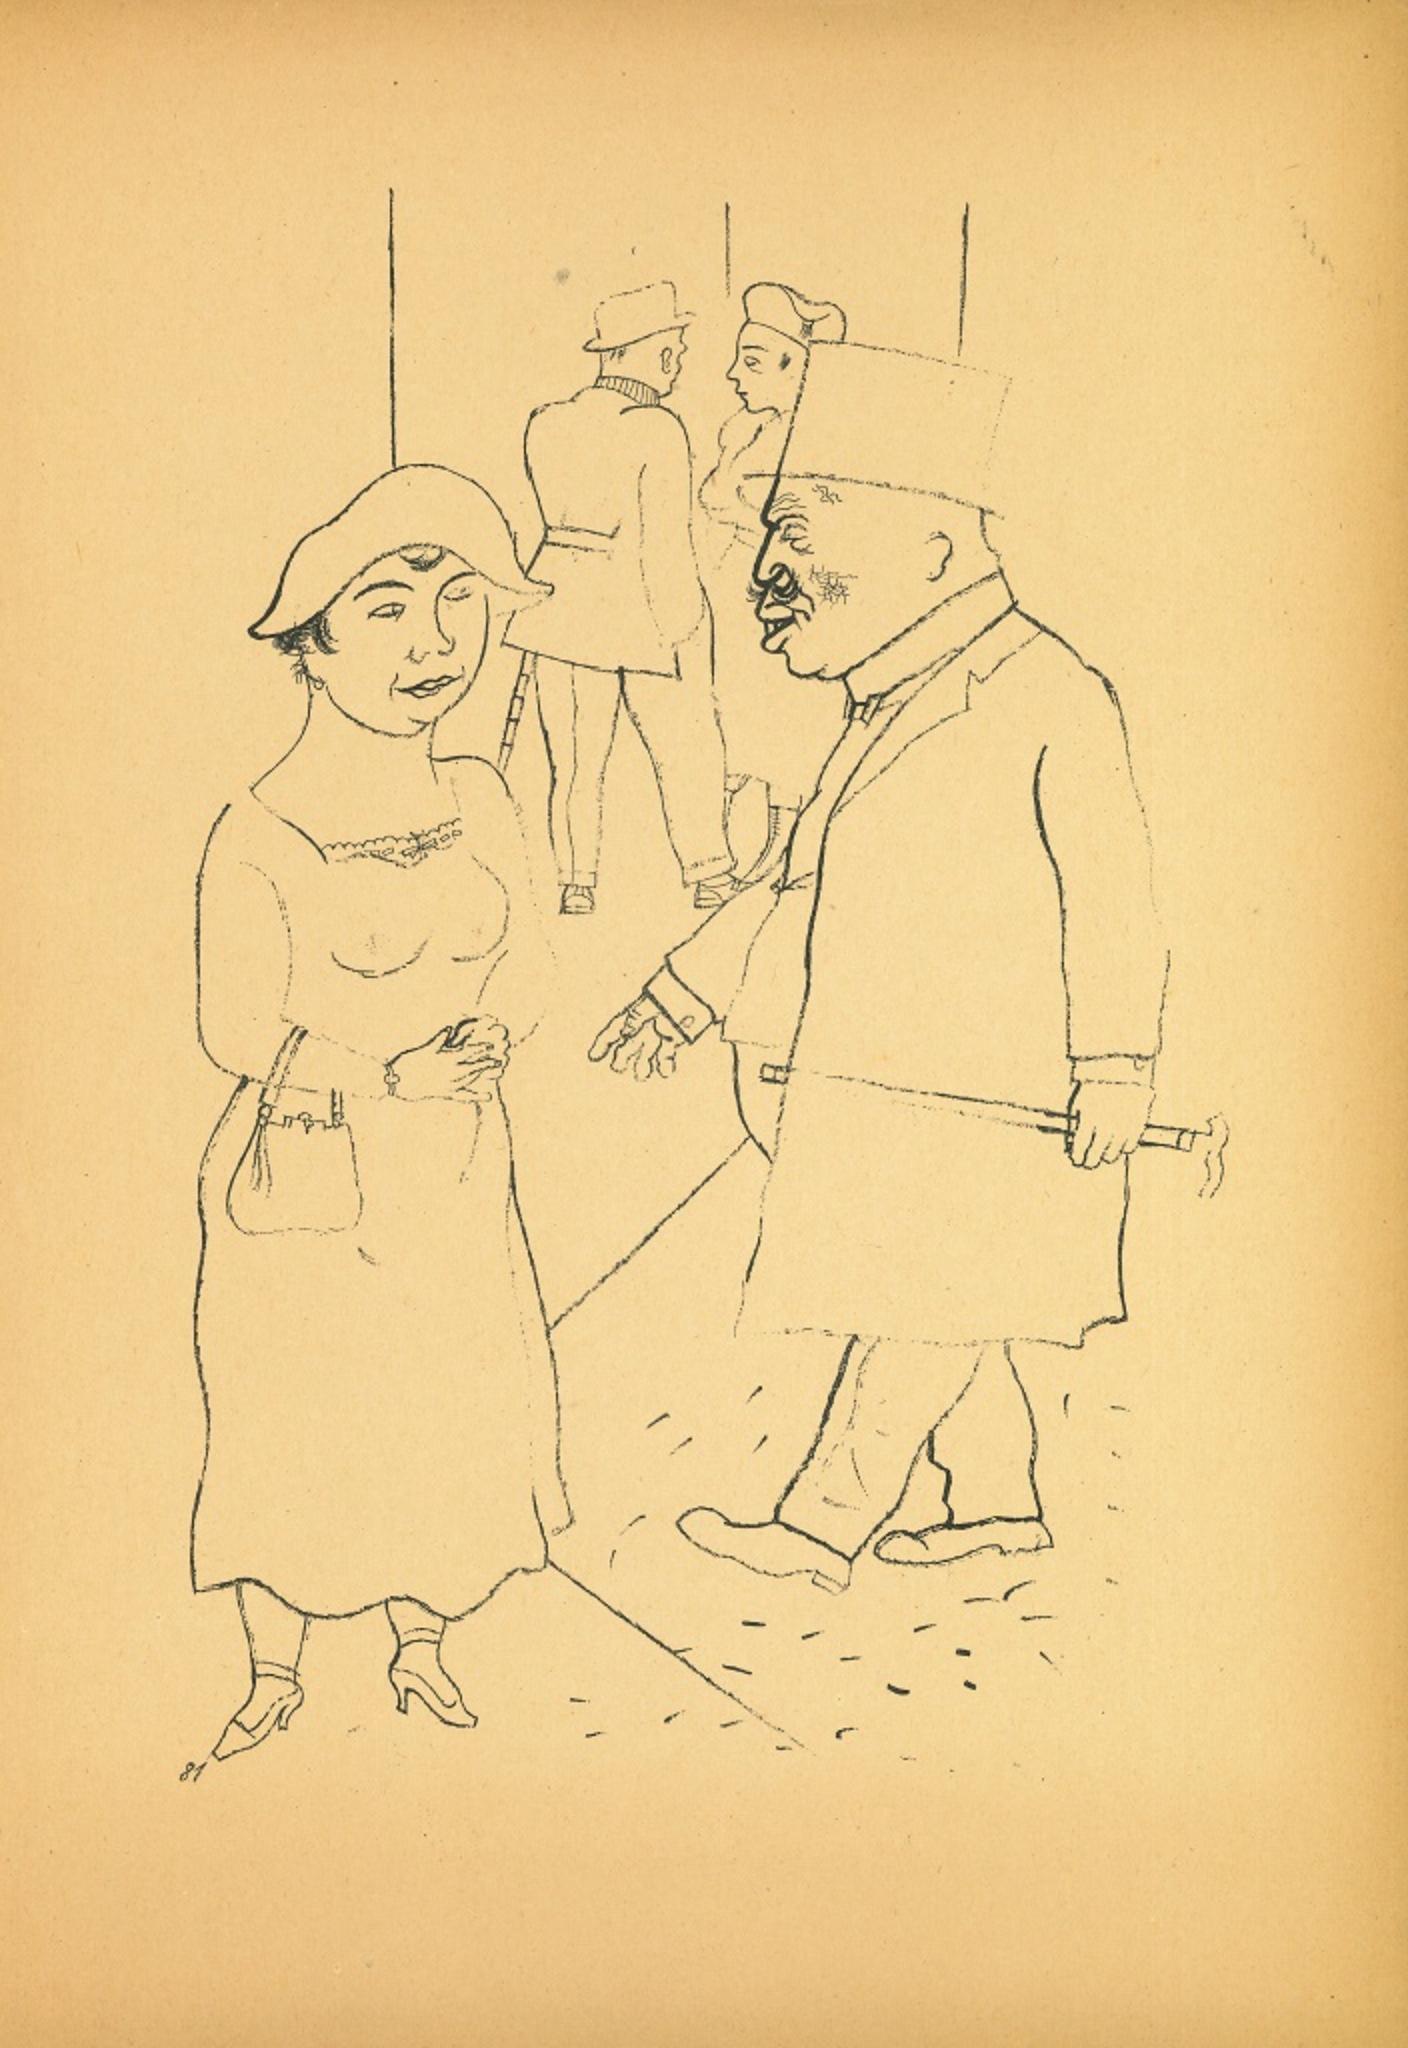 The Walk - Offset and Lithograph by George Grosz - 1923